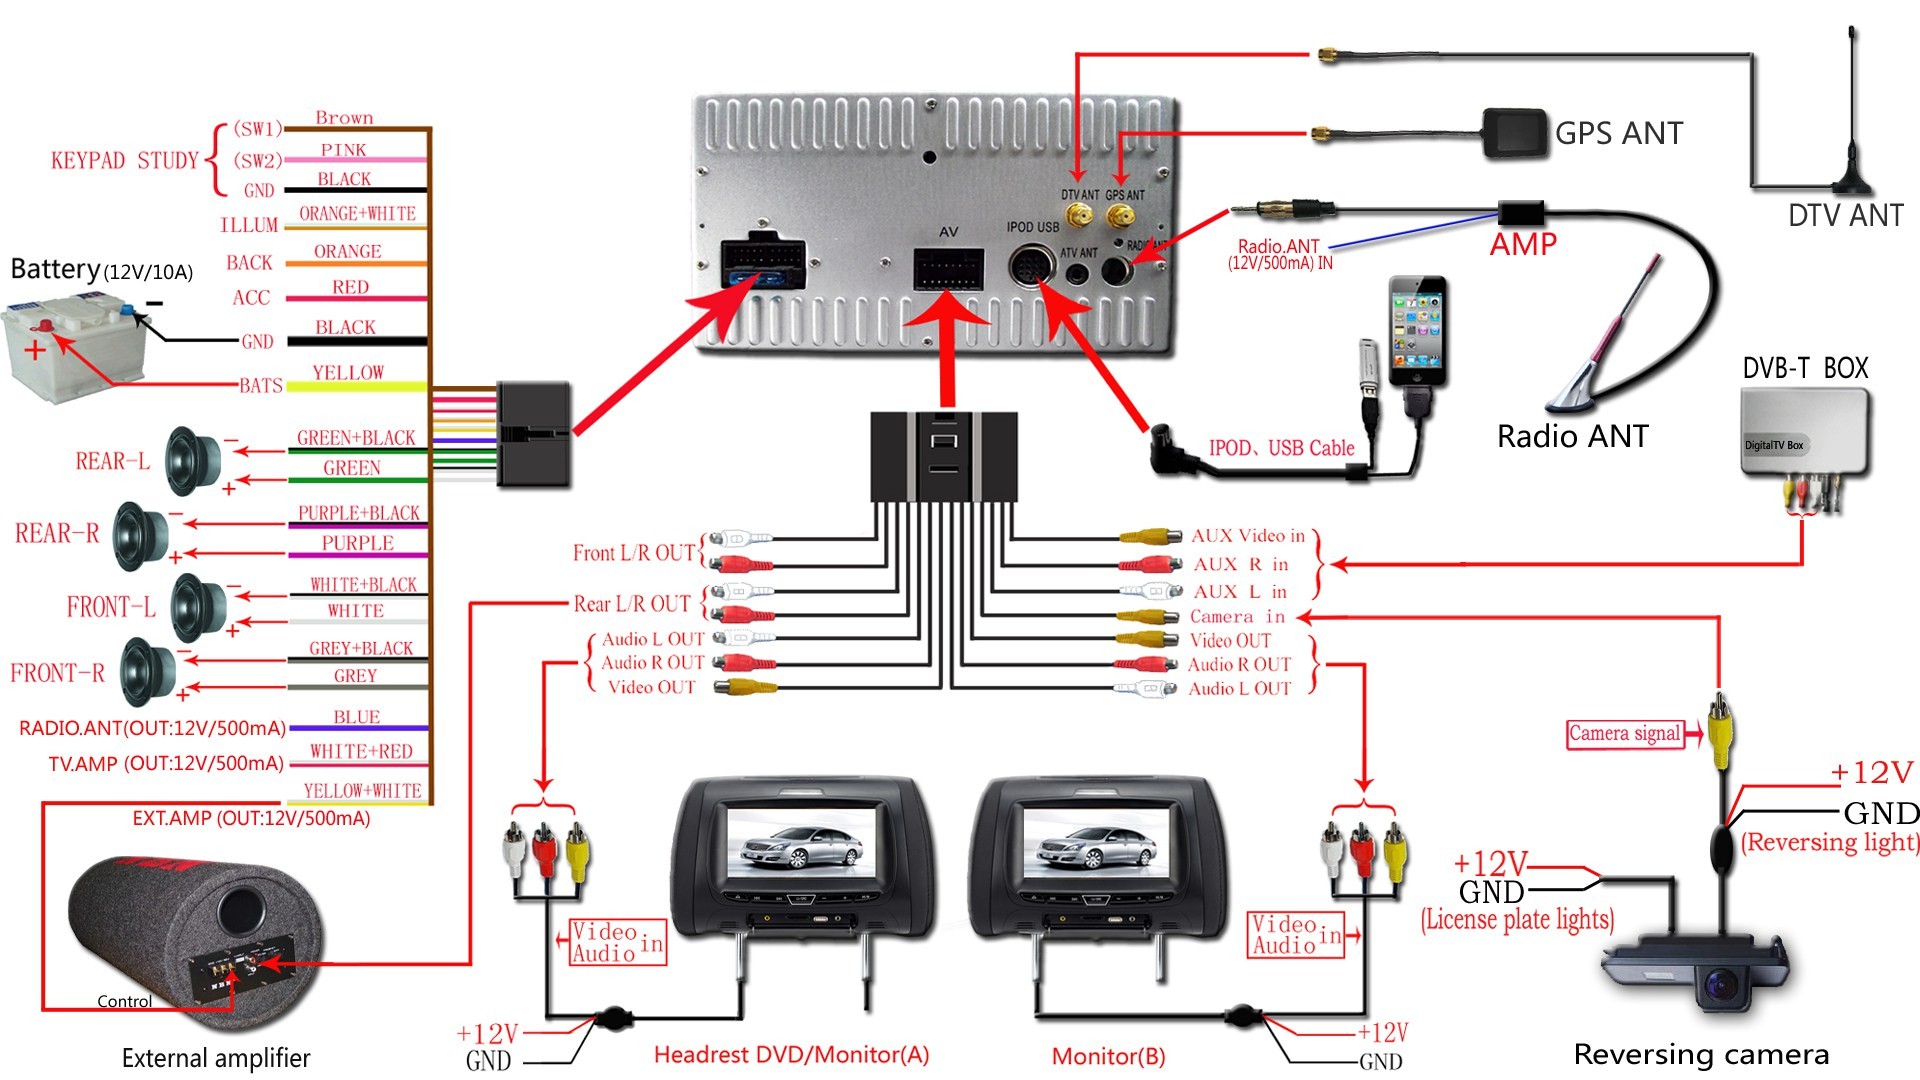 Full Size of a Simple Plan For Typical Car Stereo Wiring Diagram Wiring Diagram Car